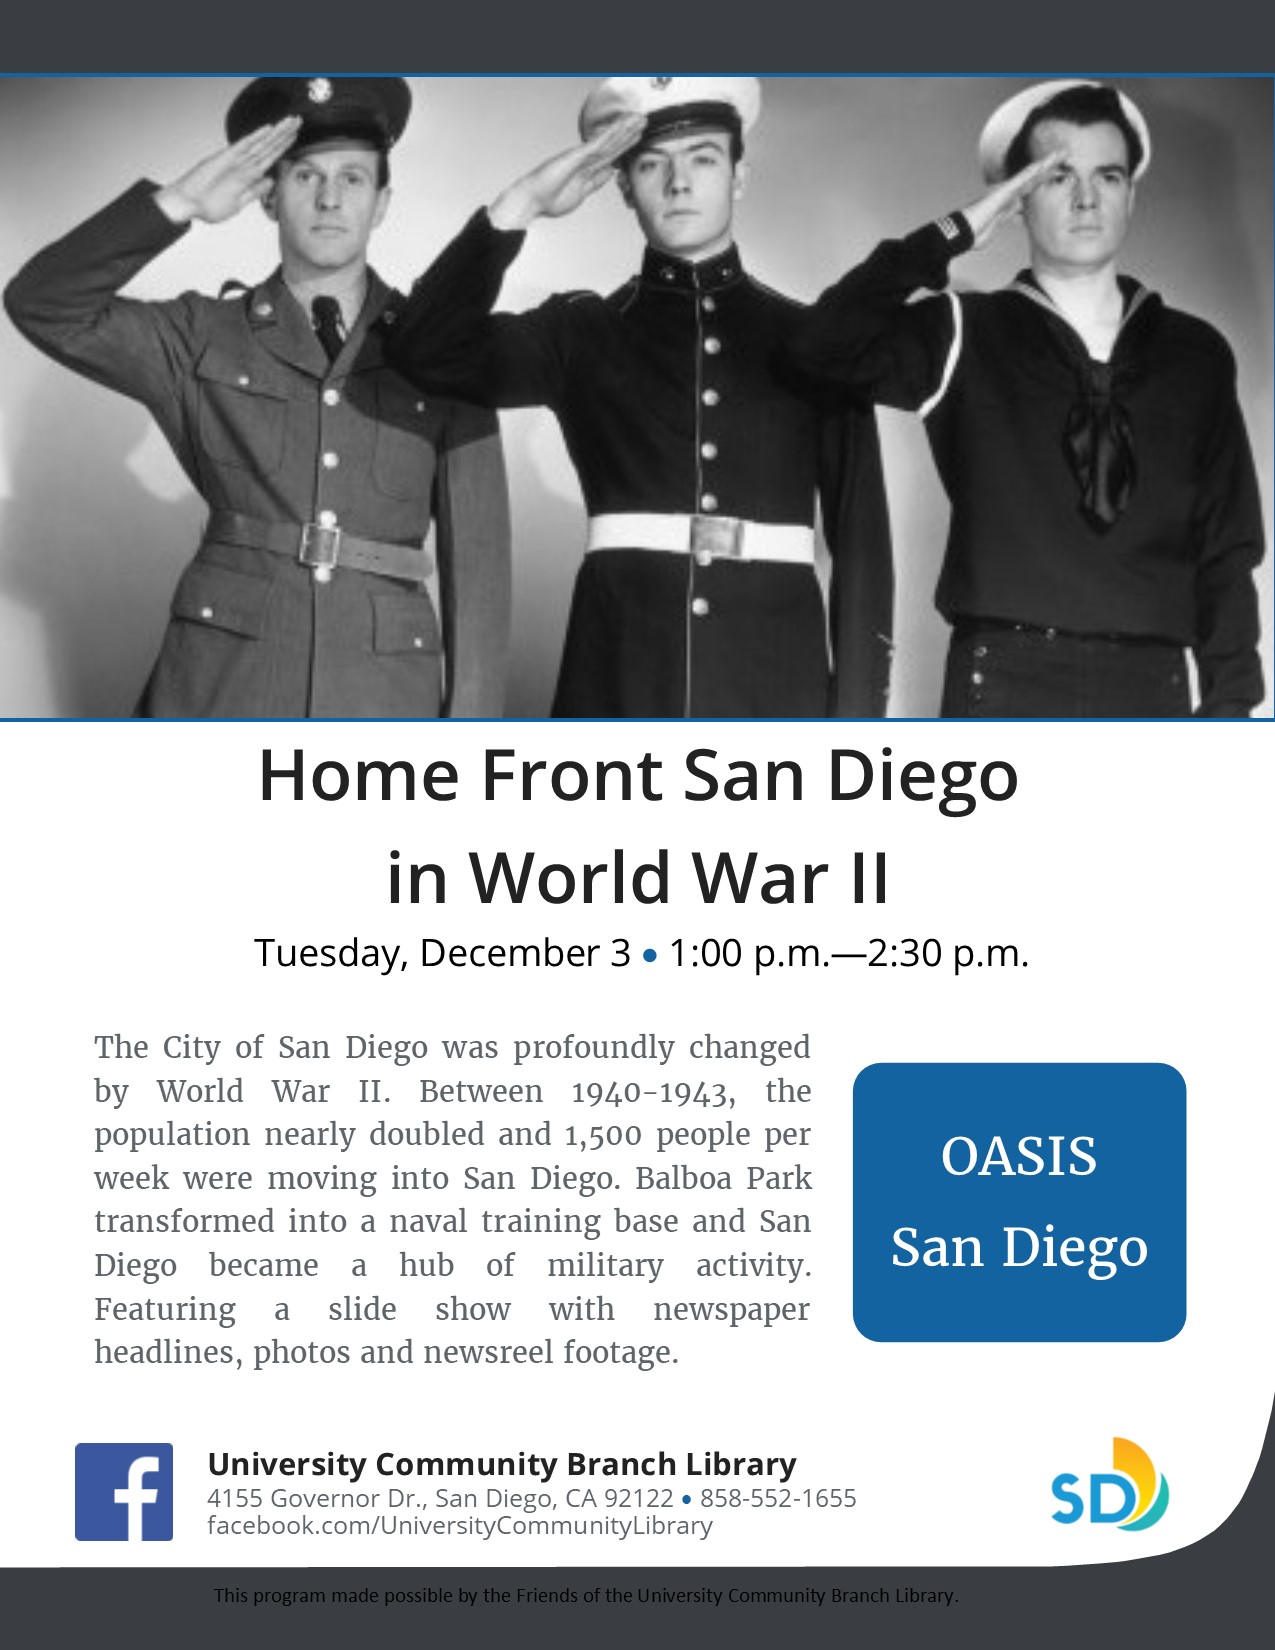 Oasis - Home Front San Diego in World War II